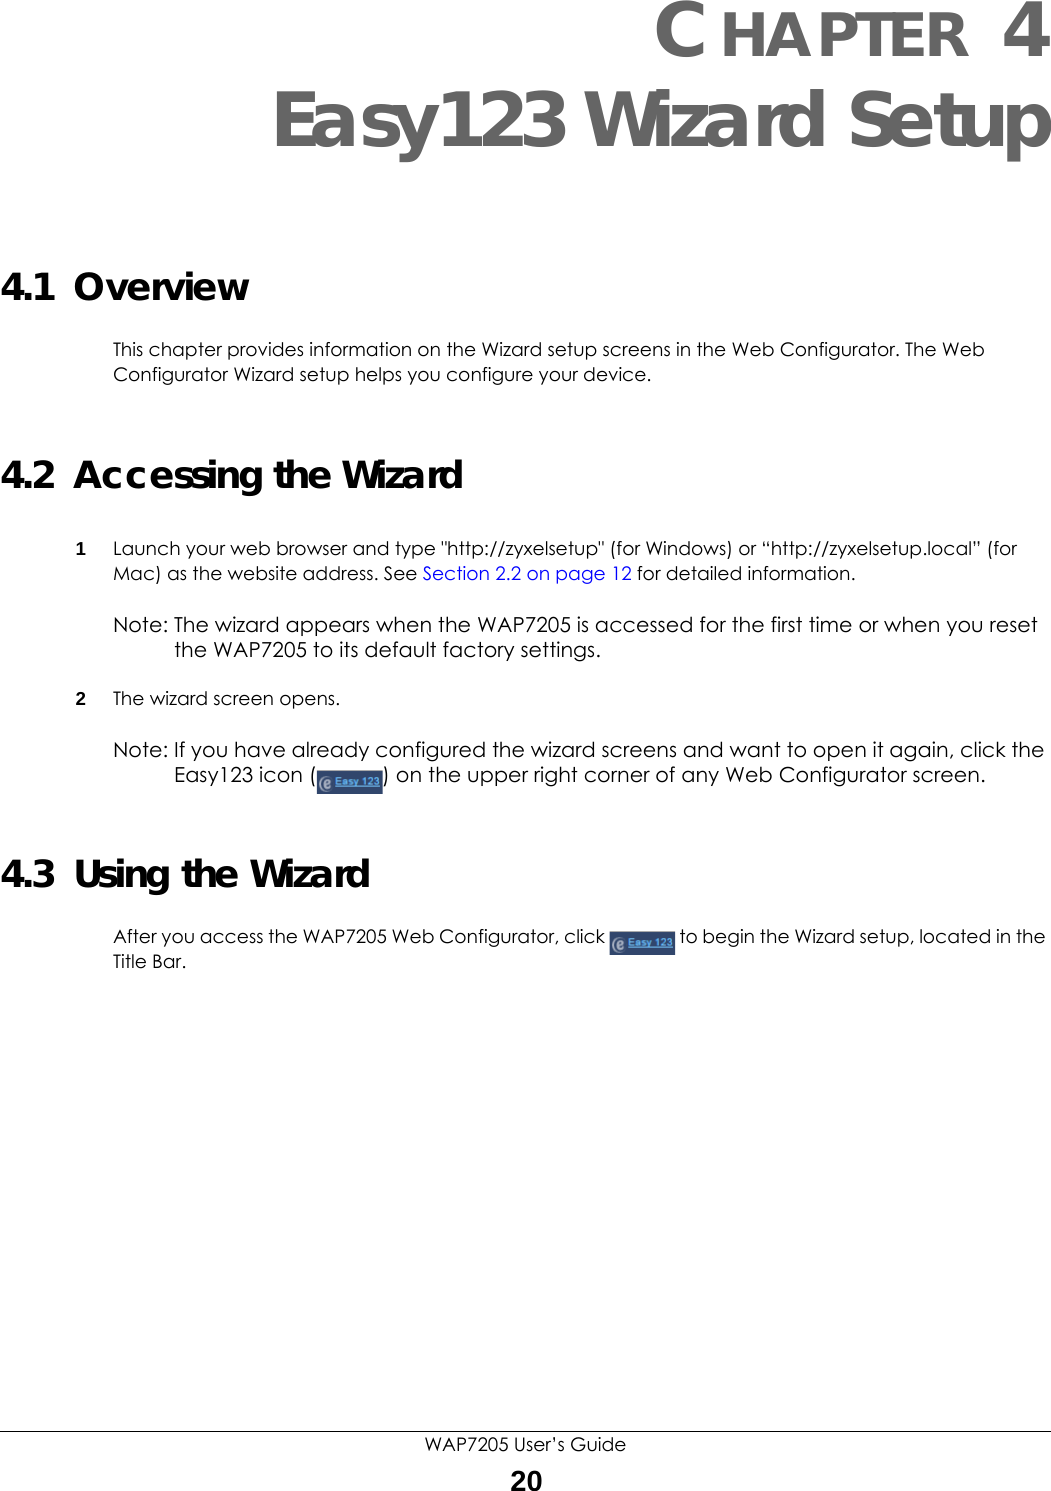 WAP7205 User’s Guide20CHAPTER 4Easy123 Wizard Setup4.1  OverviewThis chapter provides information on the Wizard setup screens in the Web Configurator. The Web Configurator Wizard setup helps you configure your device. 4.2  Accessing the Wizard1Launch your web browser and type &quot;http://zyxelsetup&quot; (for Windows) or “http://zyxelsetup.local” (for Mac) as the website address. See Section 2.2 on page 12 for detailed information.Note: The wizard appears when the WAP7205 is accessed for the first time or when you reset the WAP7205 to its default factory settings.2The wizard screen opens.Note: If you have already configured the wizard screens and want to open it again, click the Easy123 icon ( ) on the upper right corner of any Web Configurator screen.4.3  Using the WizardAfter you access the WAP7205 Web Configurator, click  to begin the Wizard setup, located in the Title Bar. 